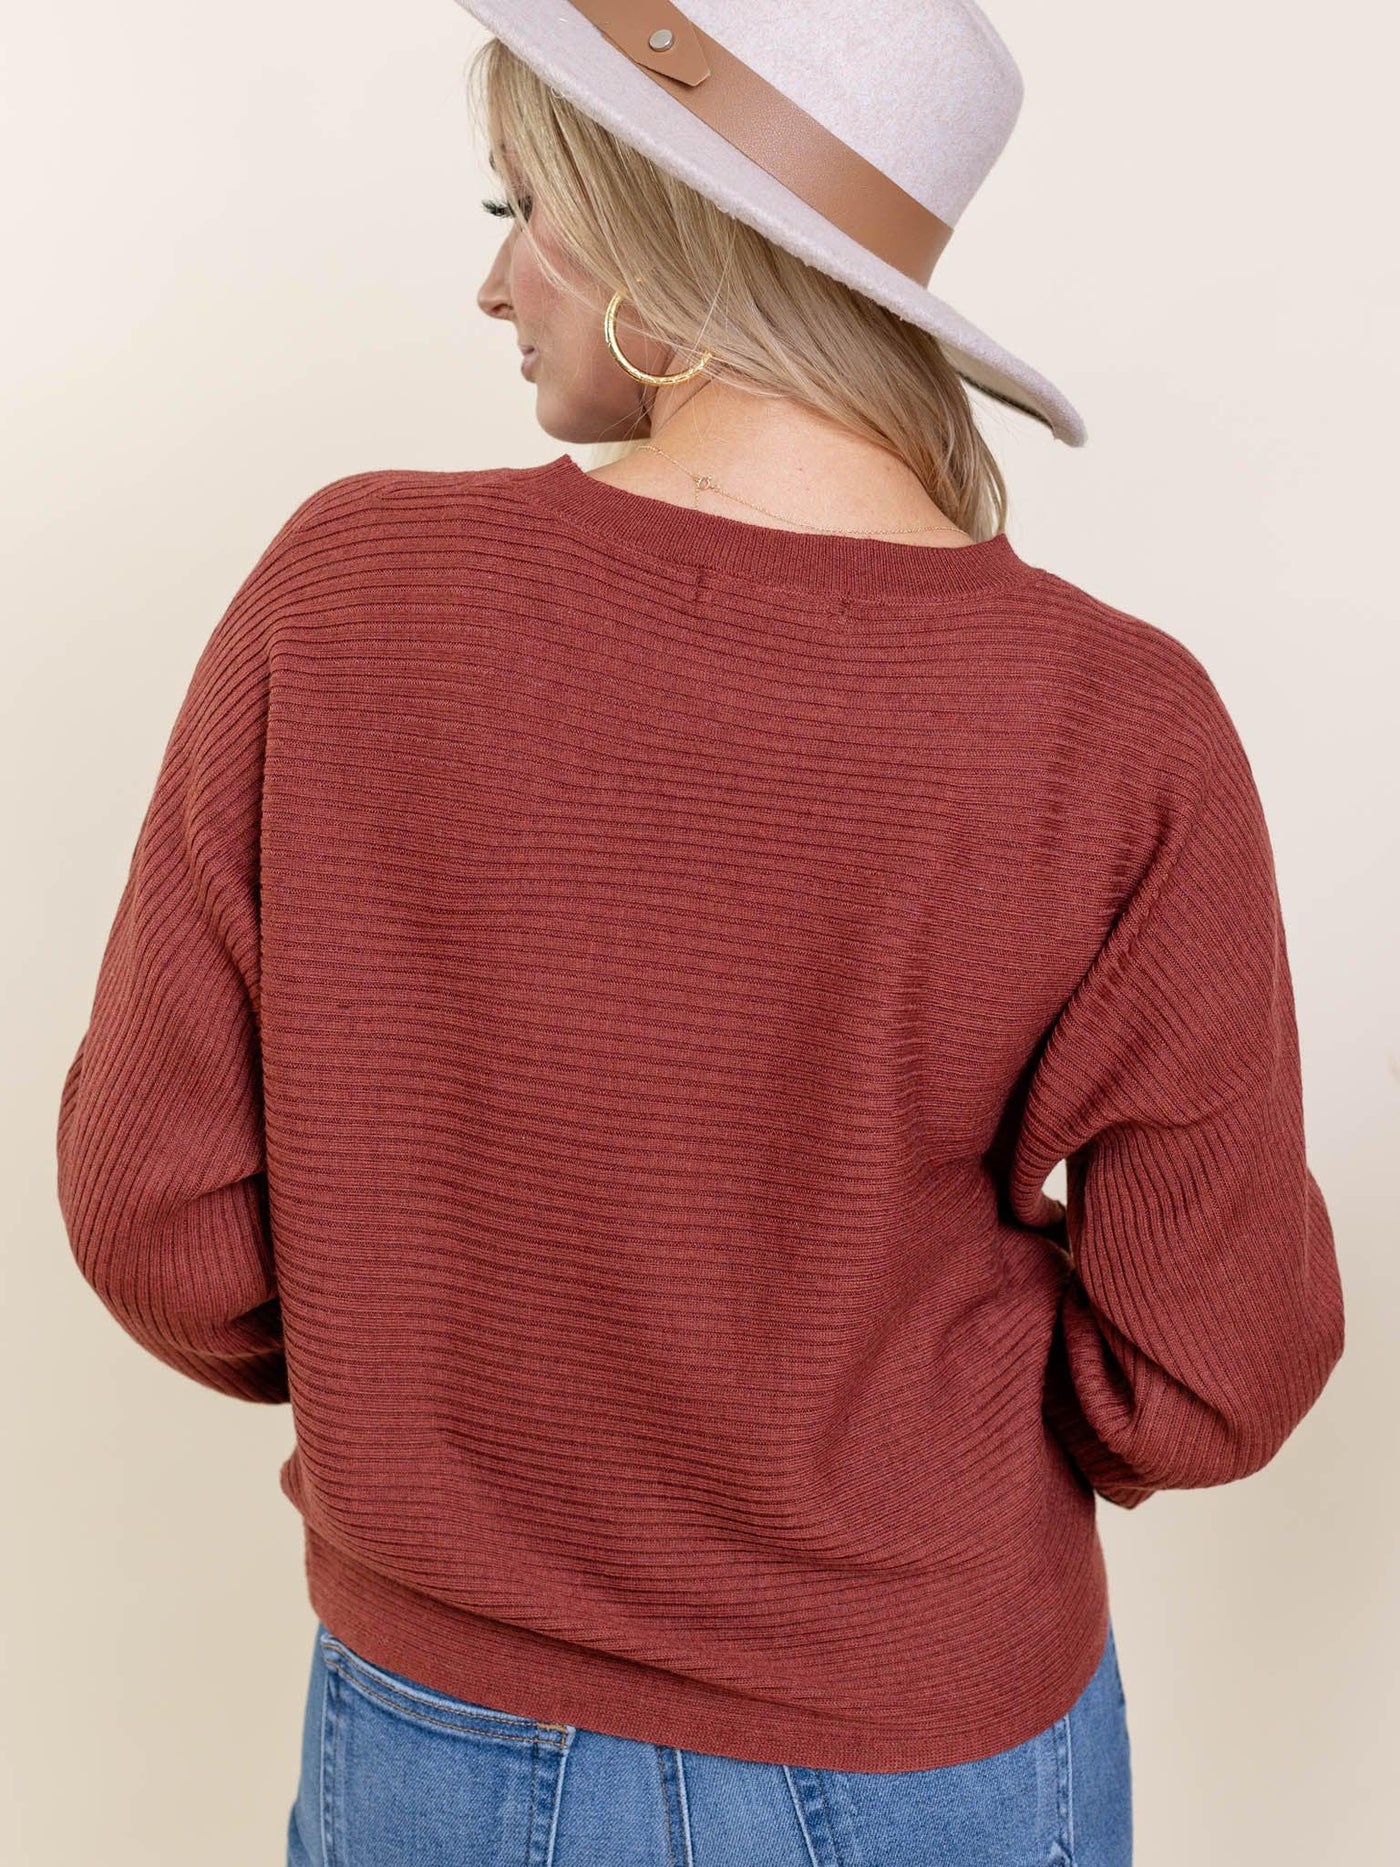 lightweight colored sweater